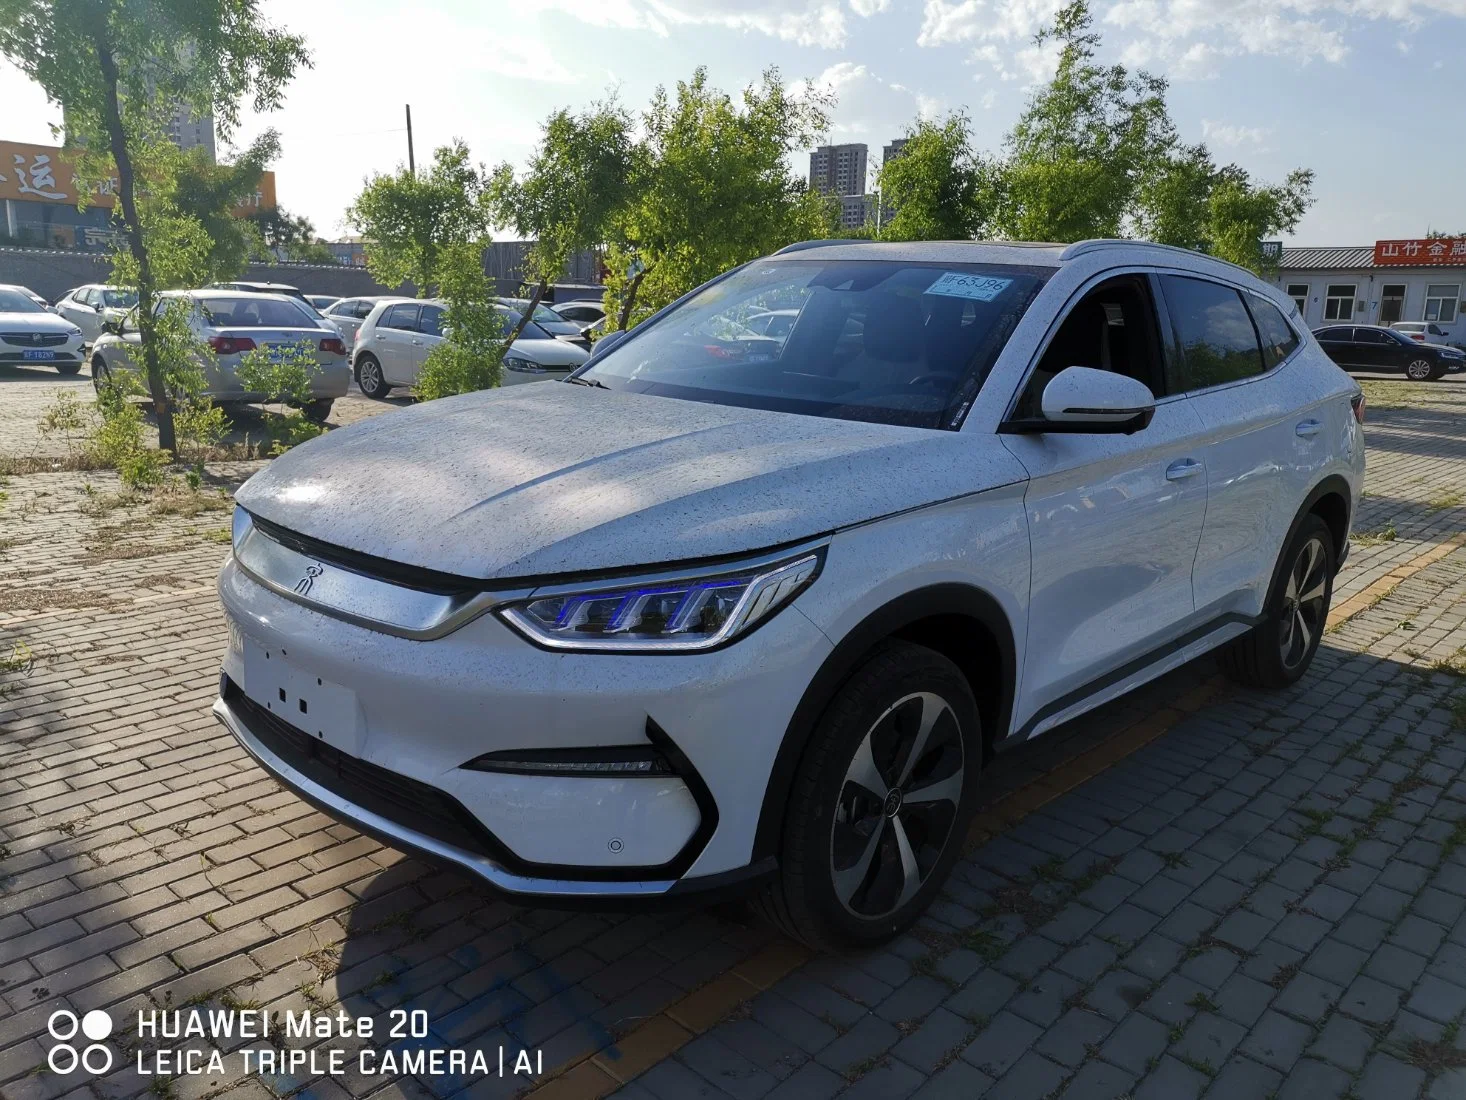 2022 China EV Byd Song Plus Byd Qin Song Han Tang Yuan Automobile Vehicles Car High Speed SUV Electric Vehicles New Energy Cars